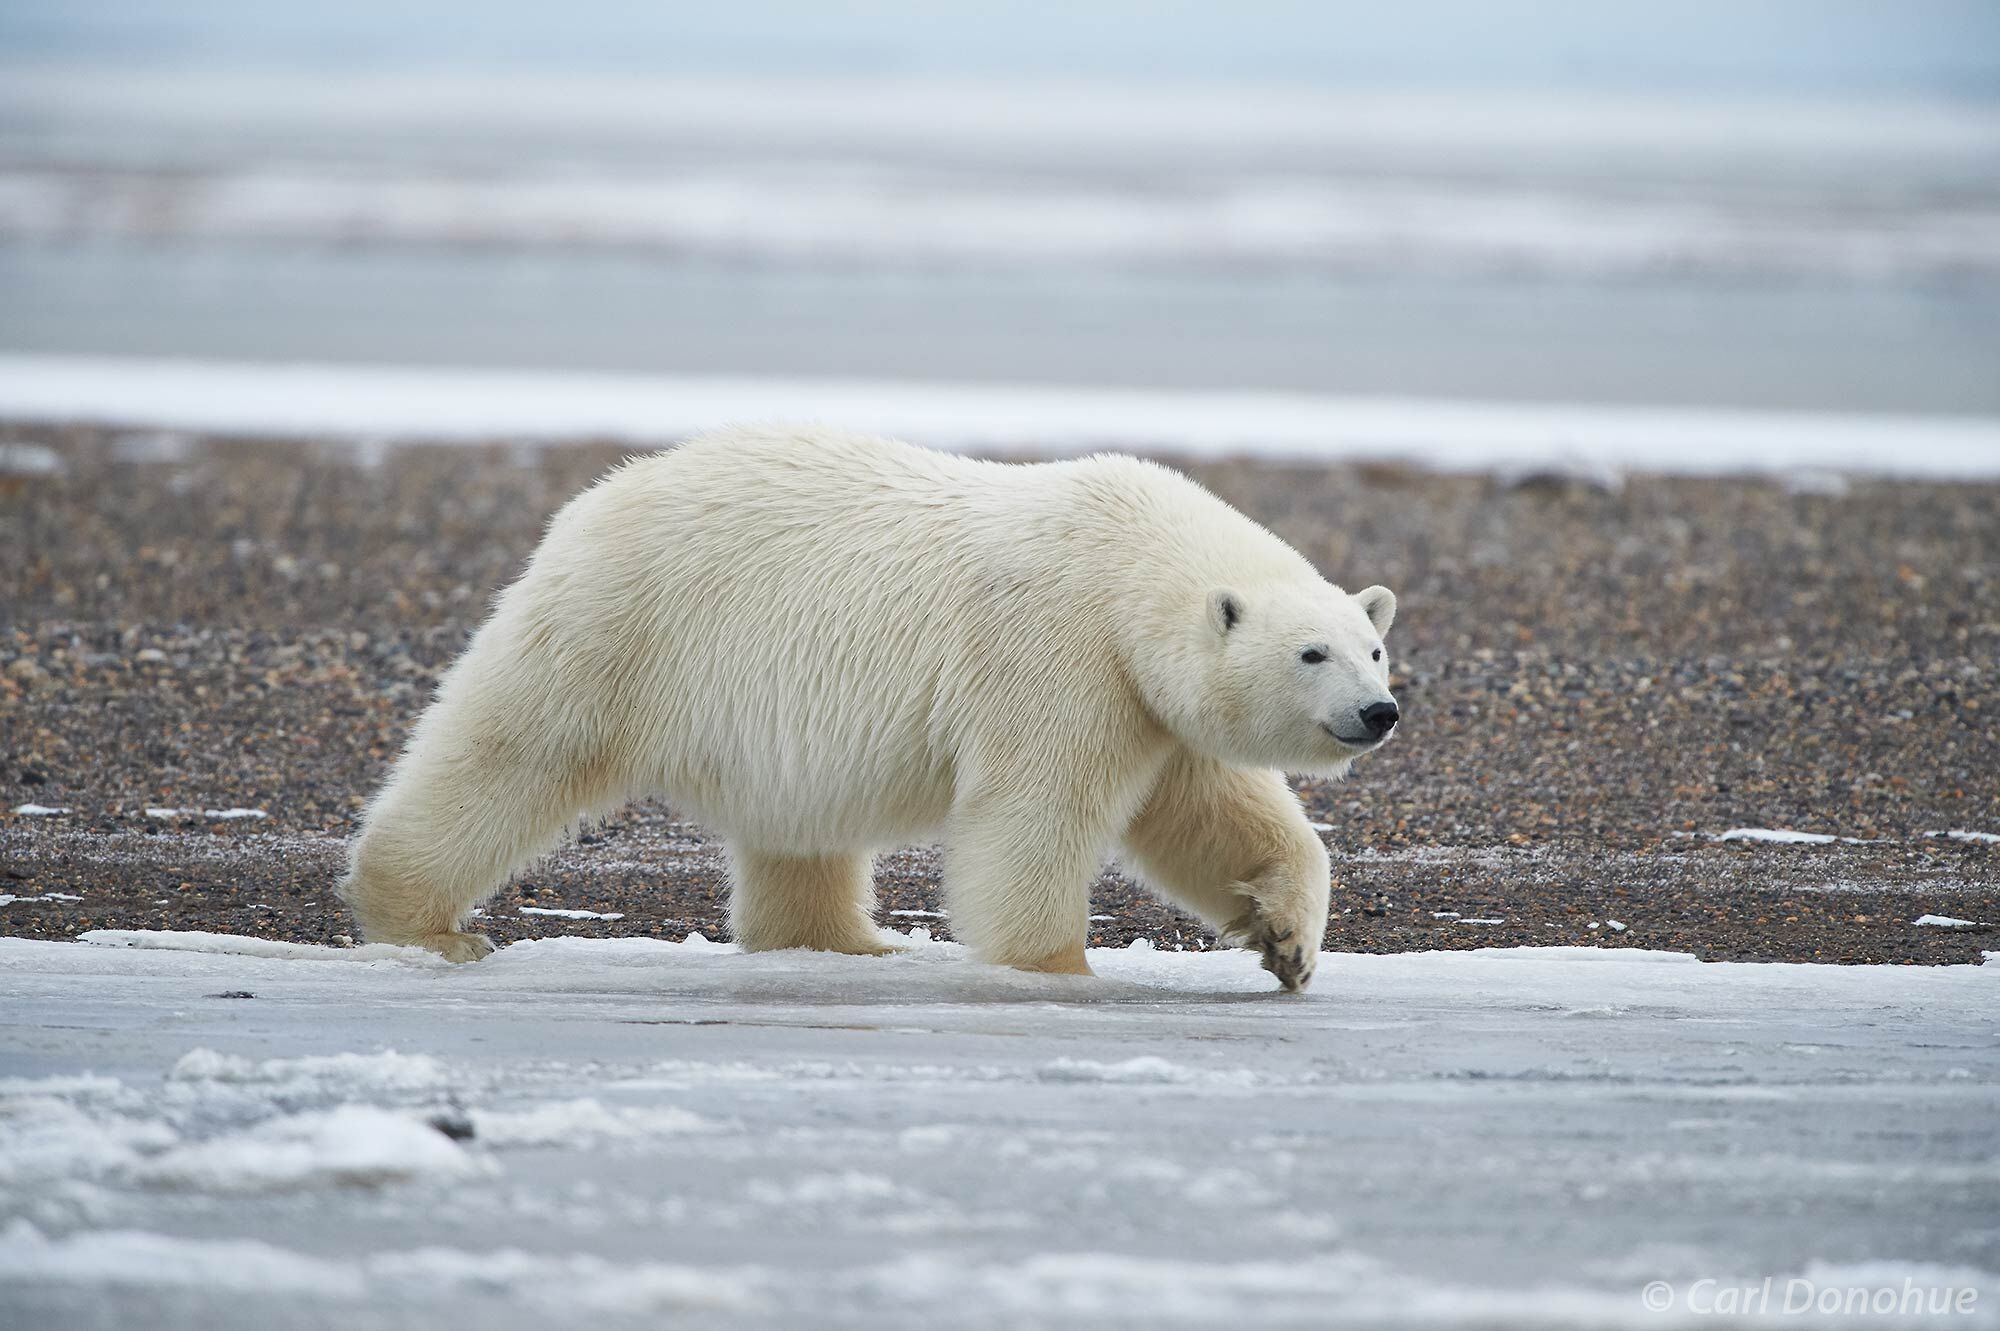 A young polar bear cautiously tests the early ice of the Beaufort Sea, before venturing across its frozen surface. Polar Bear...